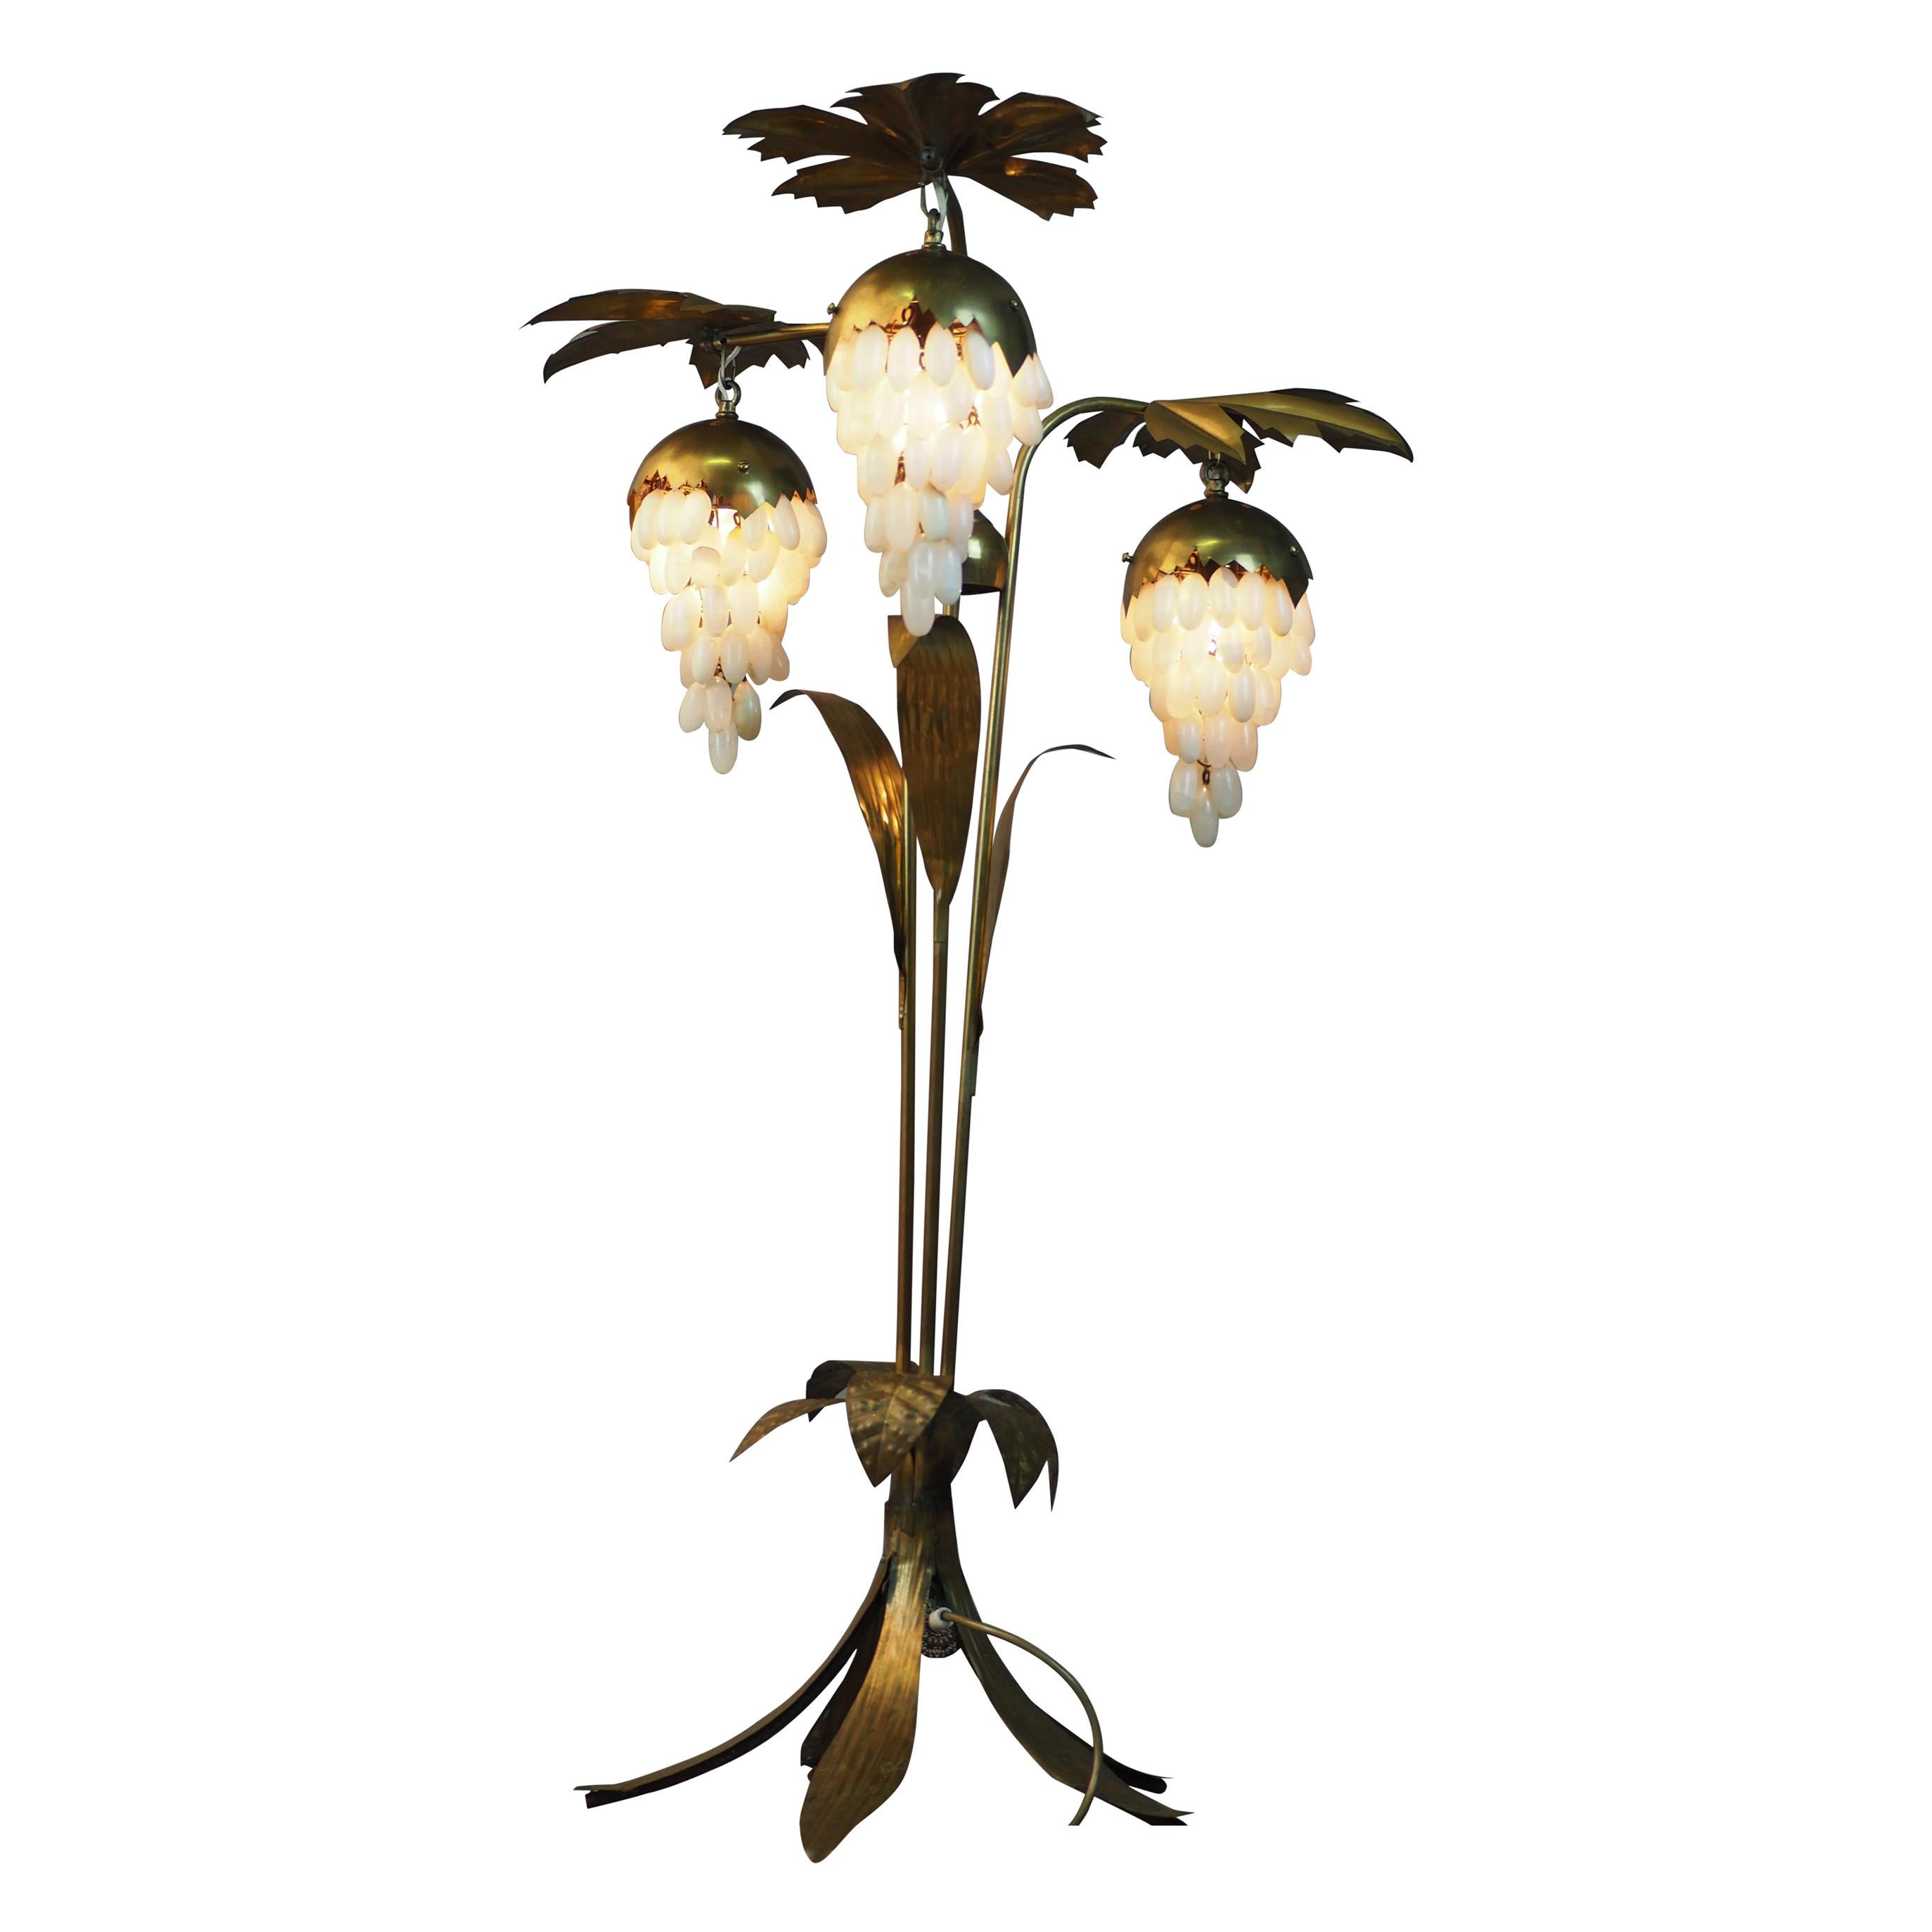 Mid-Century Brass Floor Lamp with Leafs and Alabaster Grapes, circa 1950s For Sale